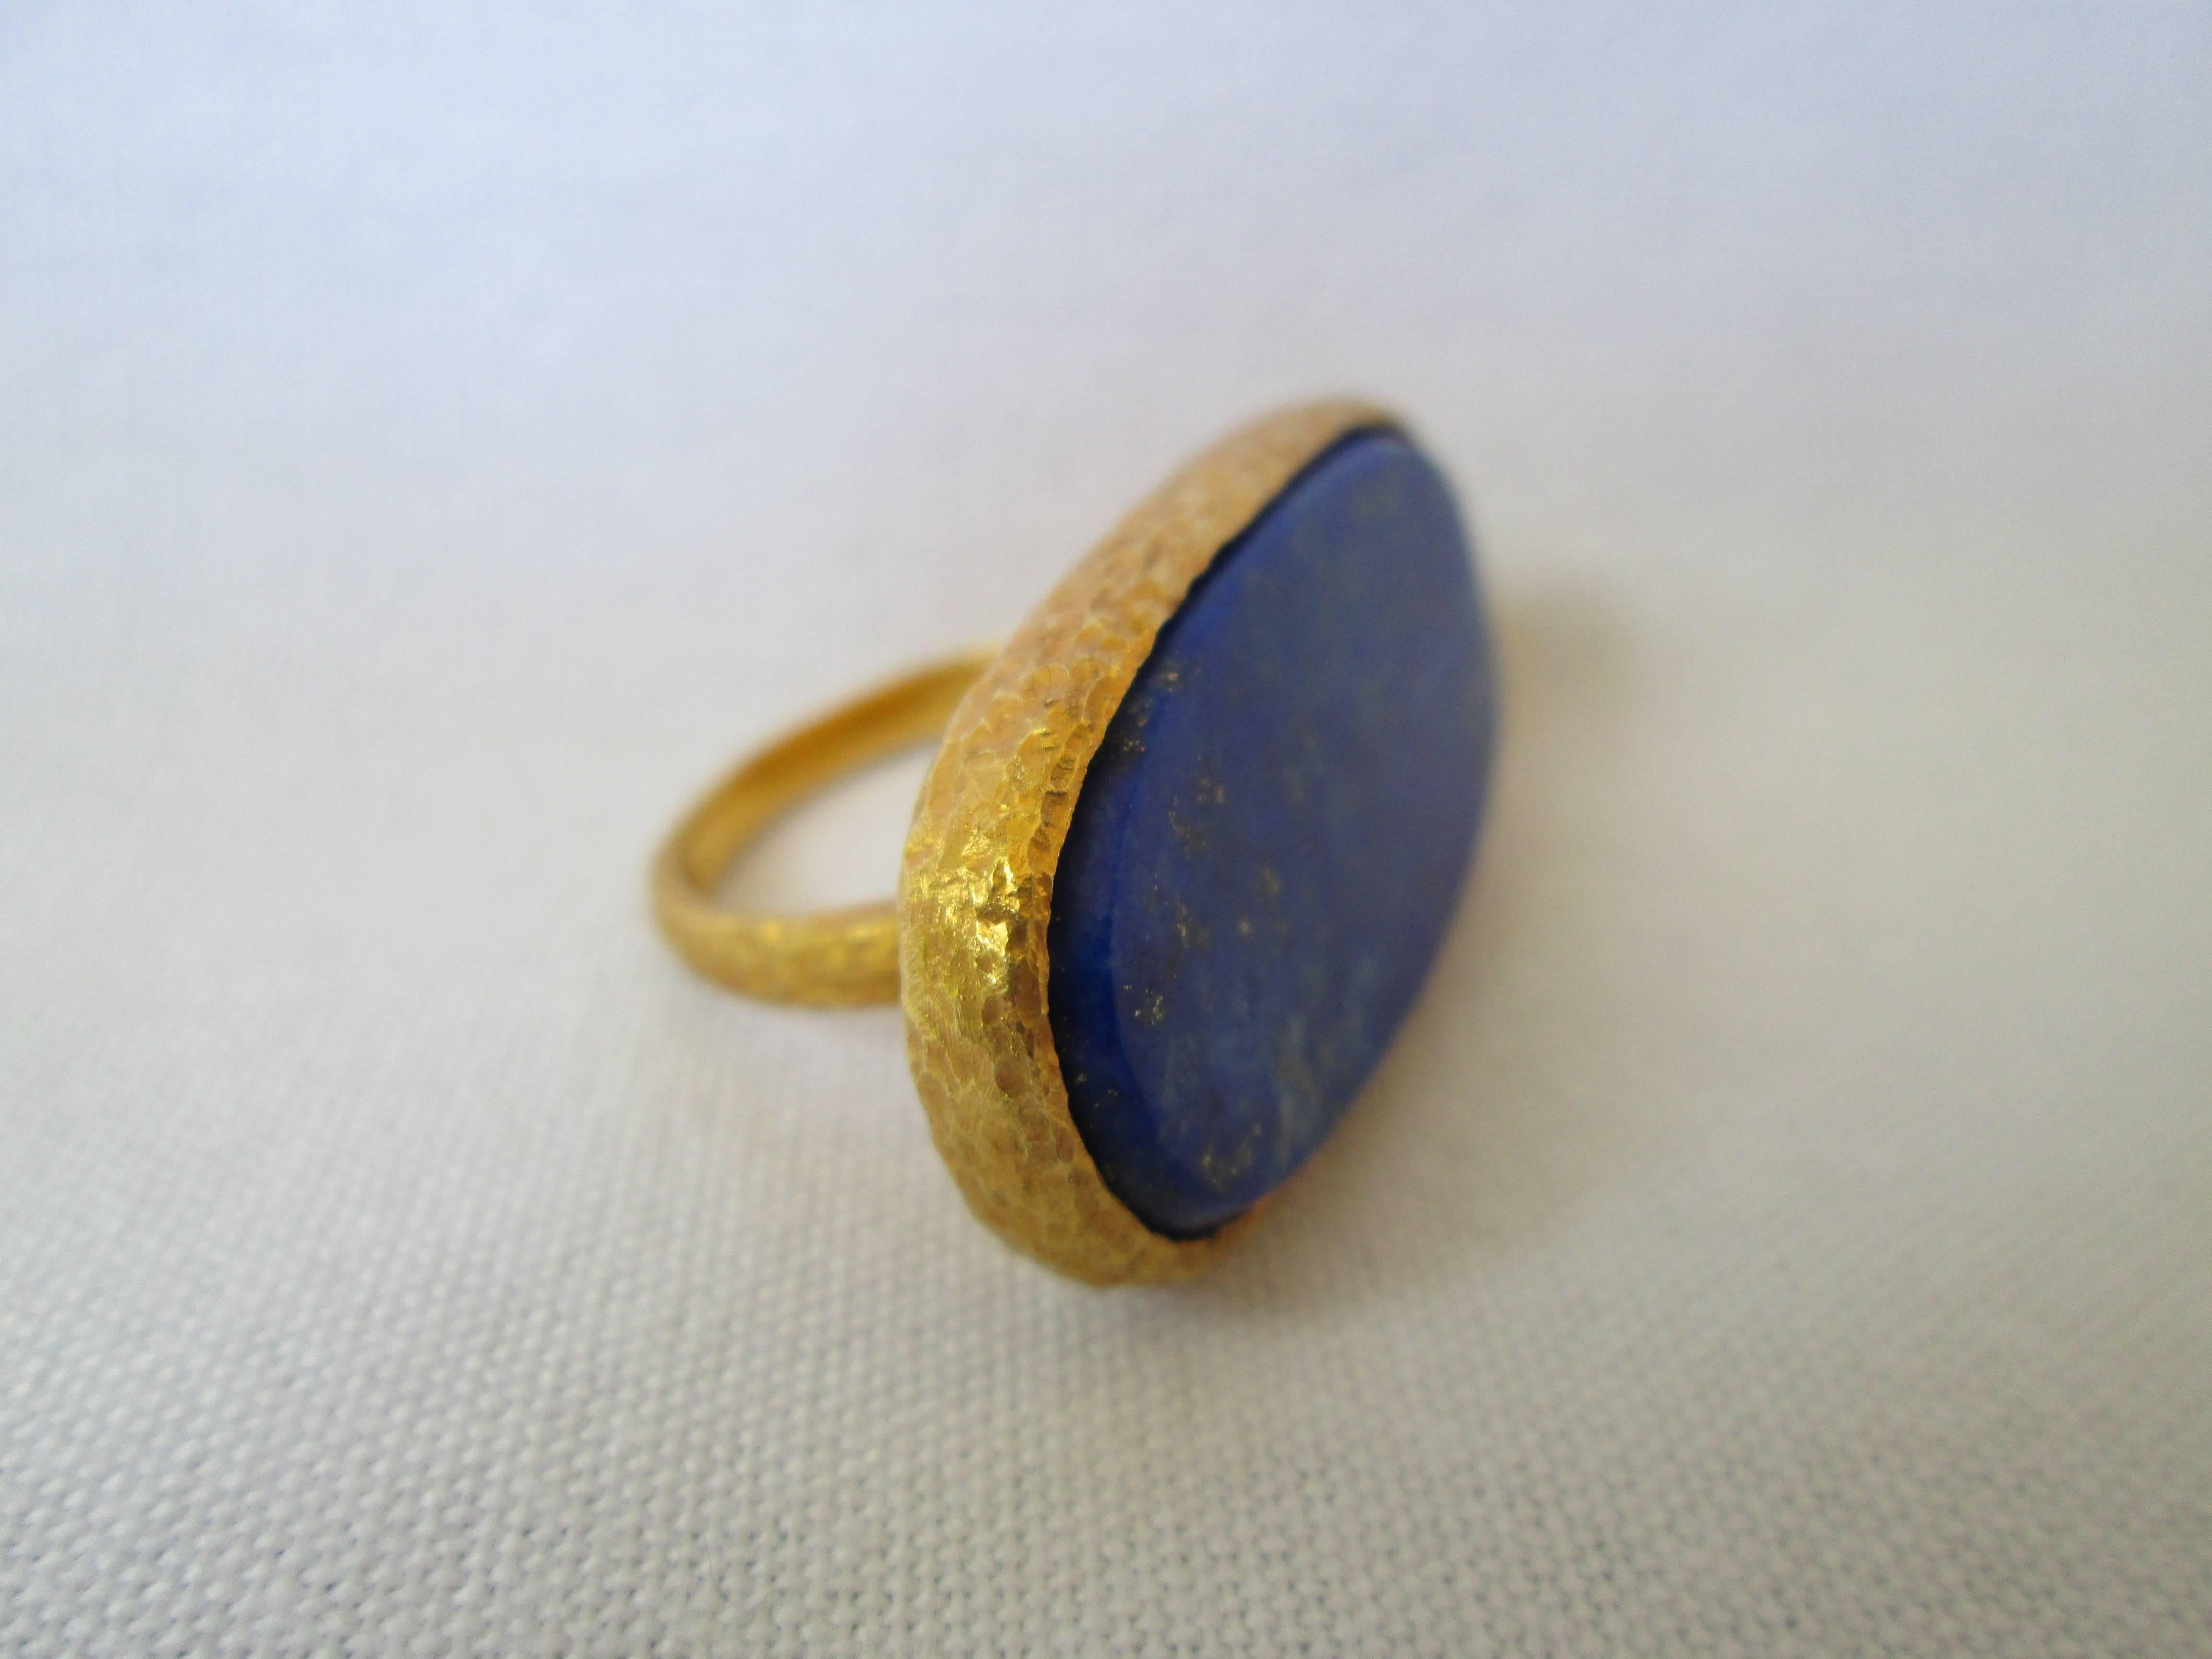 Large Oval Lapis Lazuli Stone In Hand Hammered Gold Ring By Marina J. 2016 1